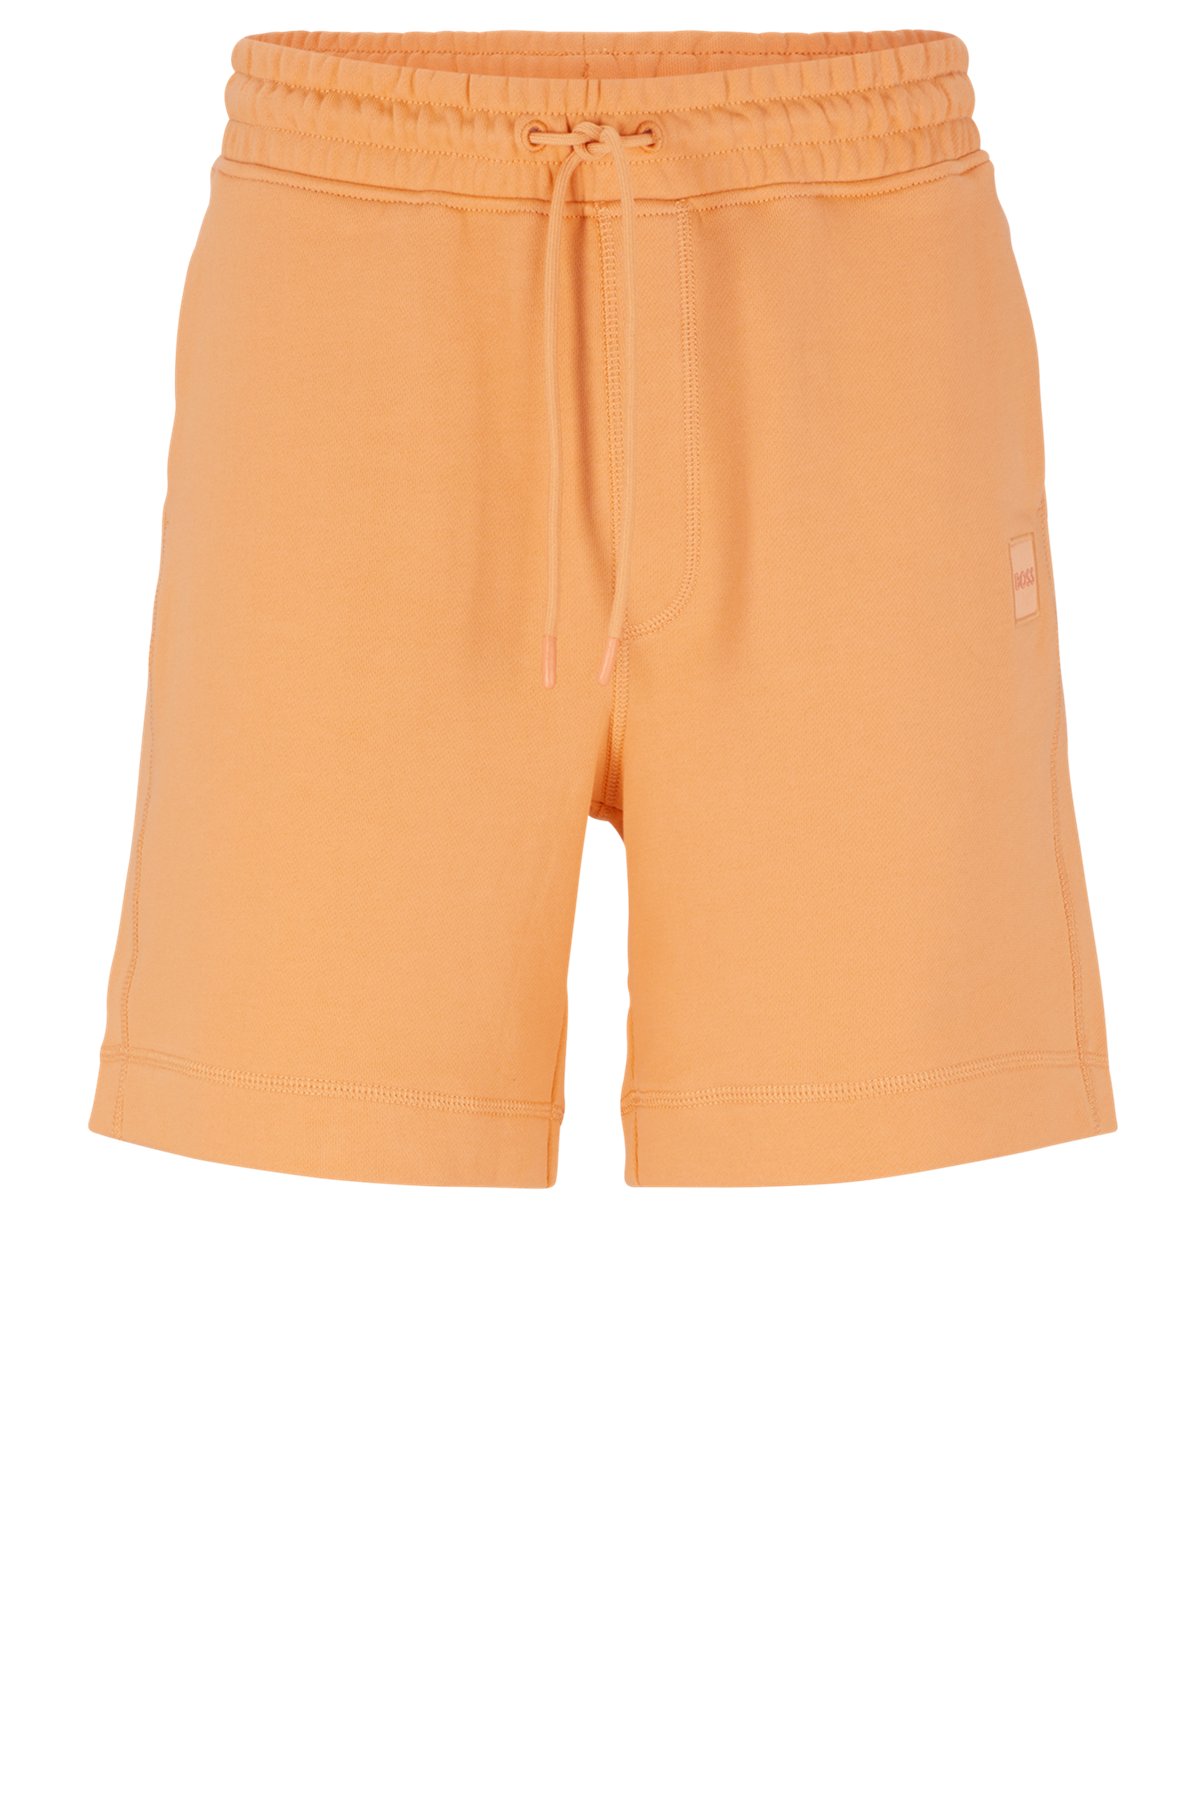 Drawstring shorts in French terry cotton with logo patch, Light Orange